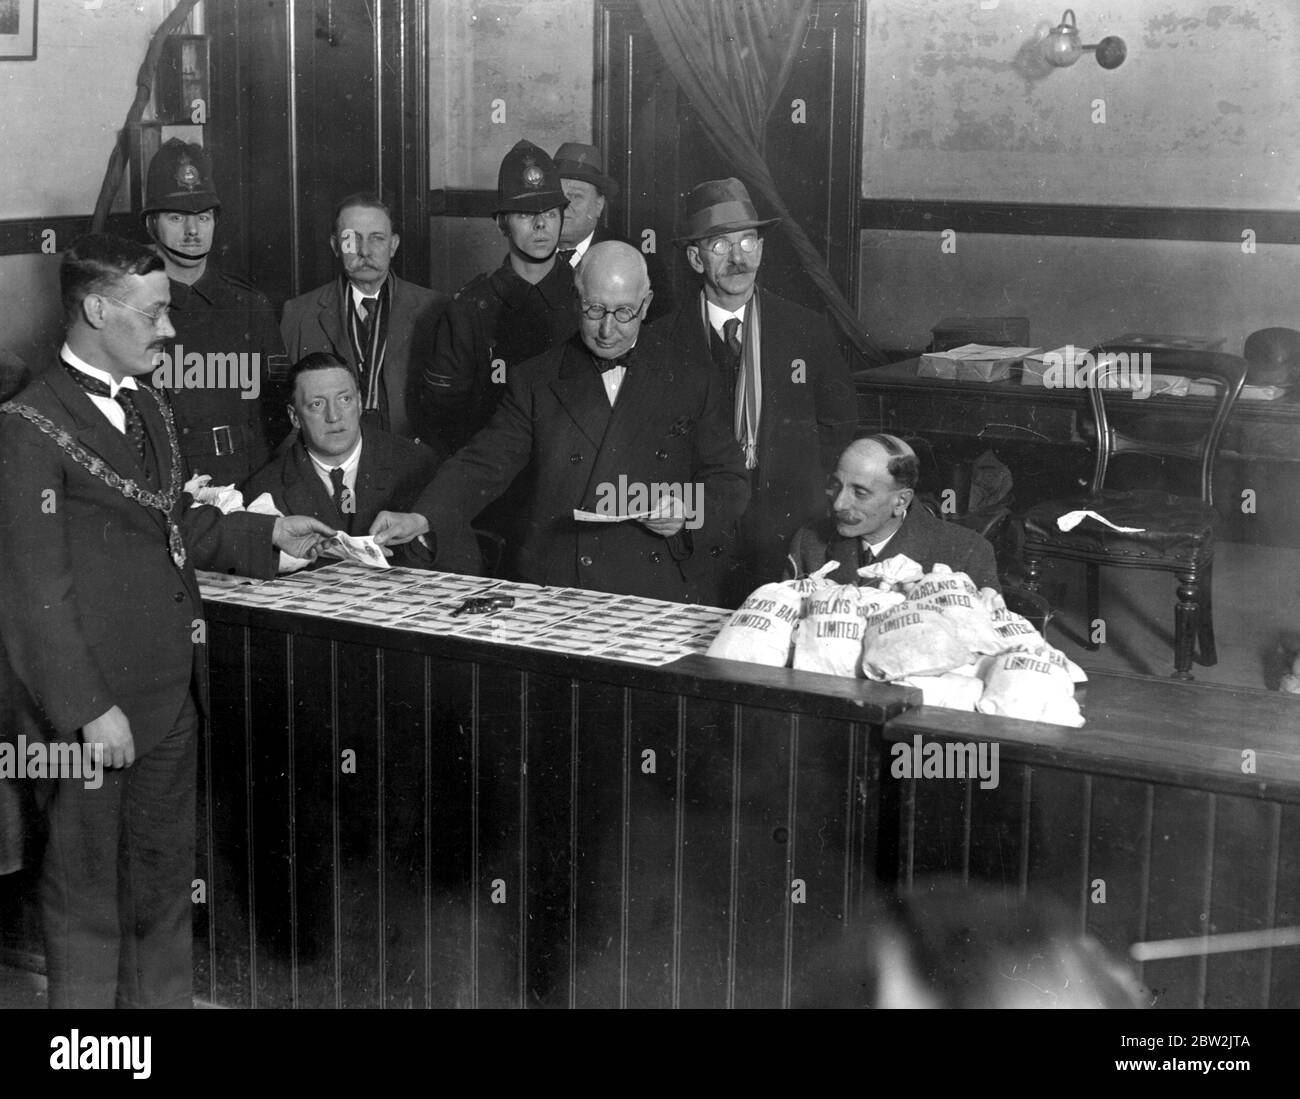 Share out of the new tabernacle society. Councillor G.J. Vaugham, Labour Mayor of Shoreditch, receiving his share. 18 December 1926 Stock Photo